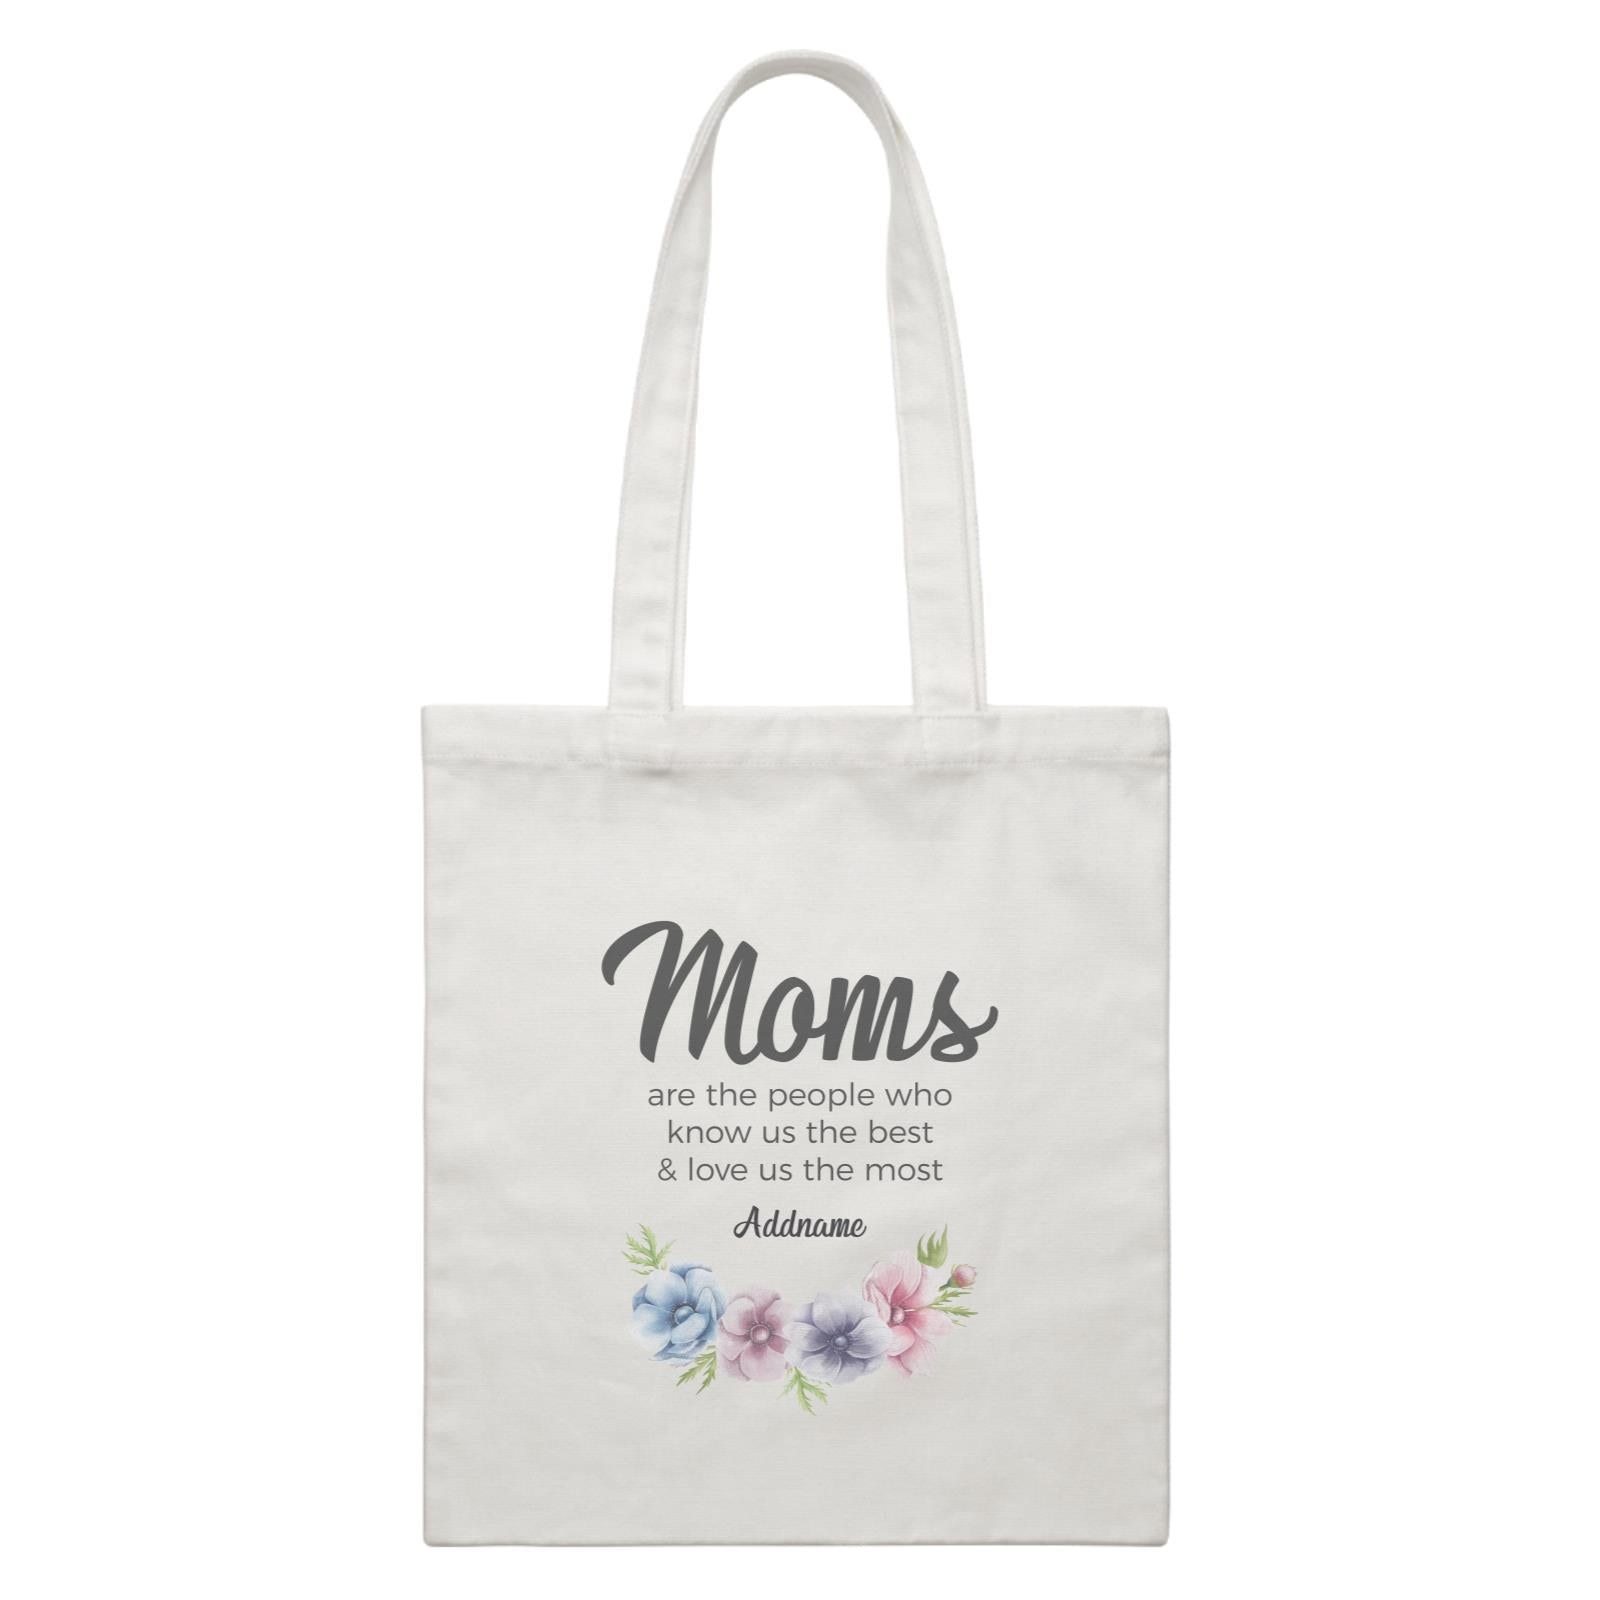 Sweet Mom Quotes 1 Moms Are The People Who Know Us The Best & Love Us The Most Addname White Canvas Bag